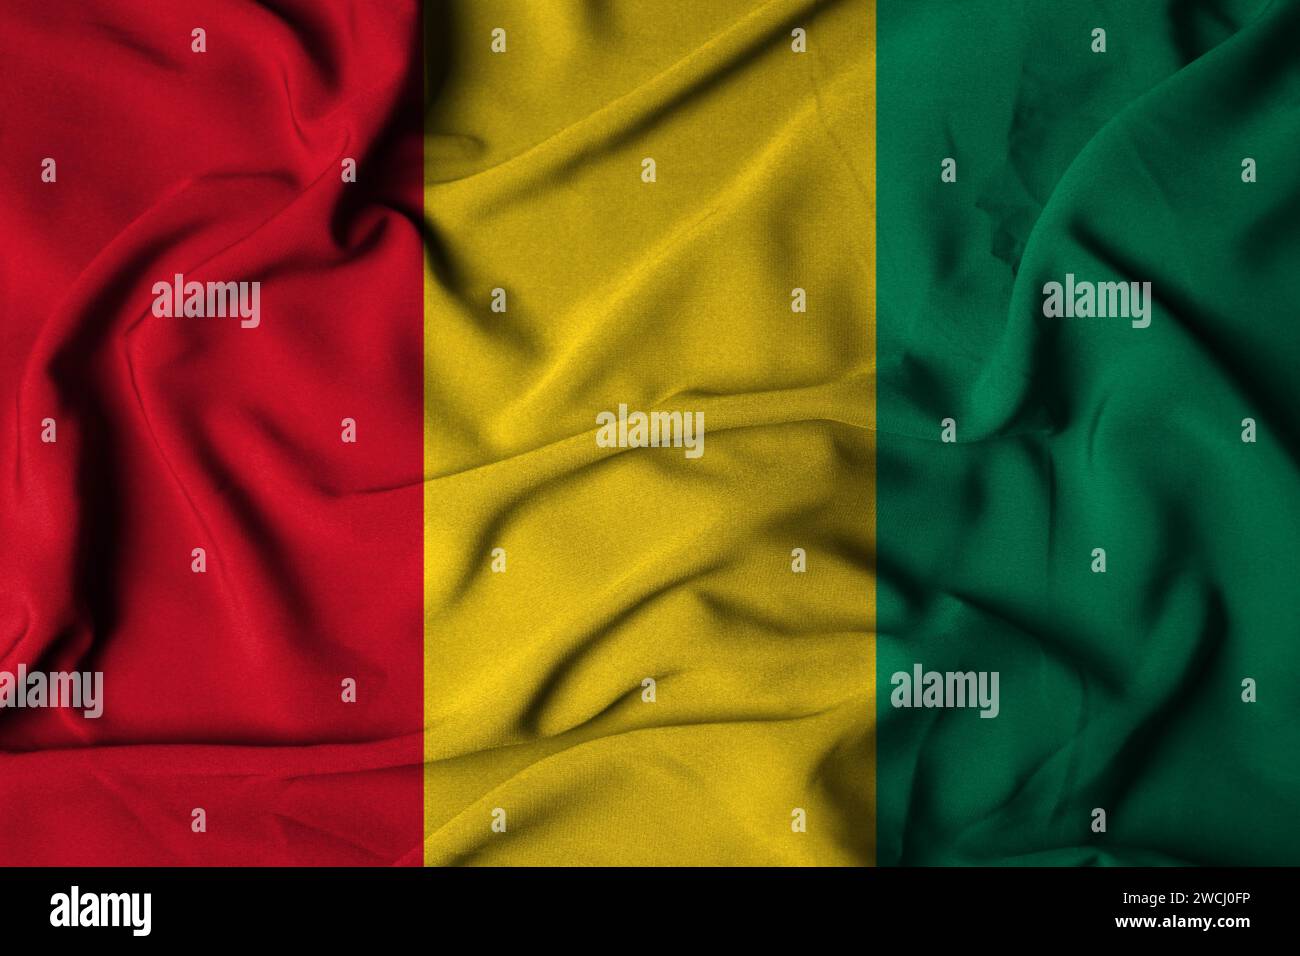 Selective focus of guinea flag, with waving fabric texture. 3d illustration Stock Photo